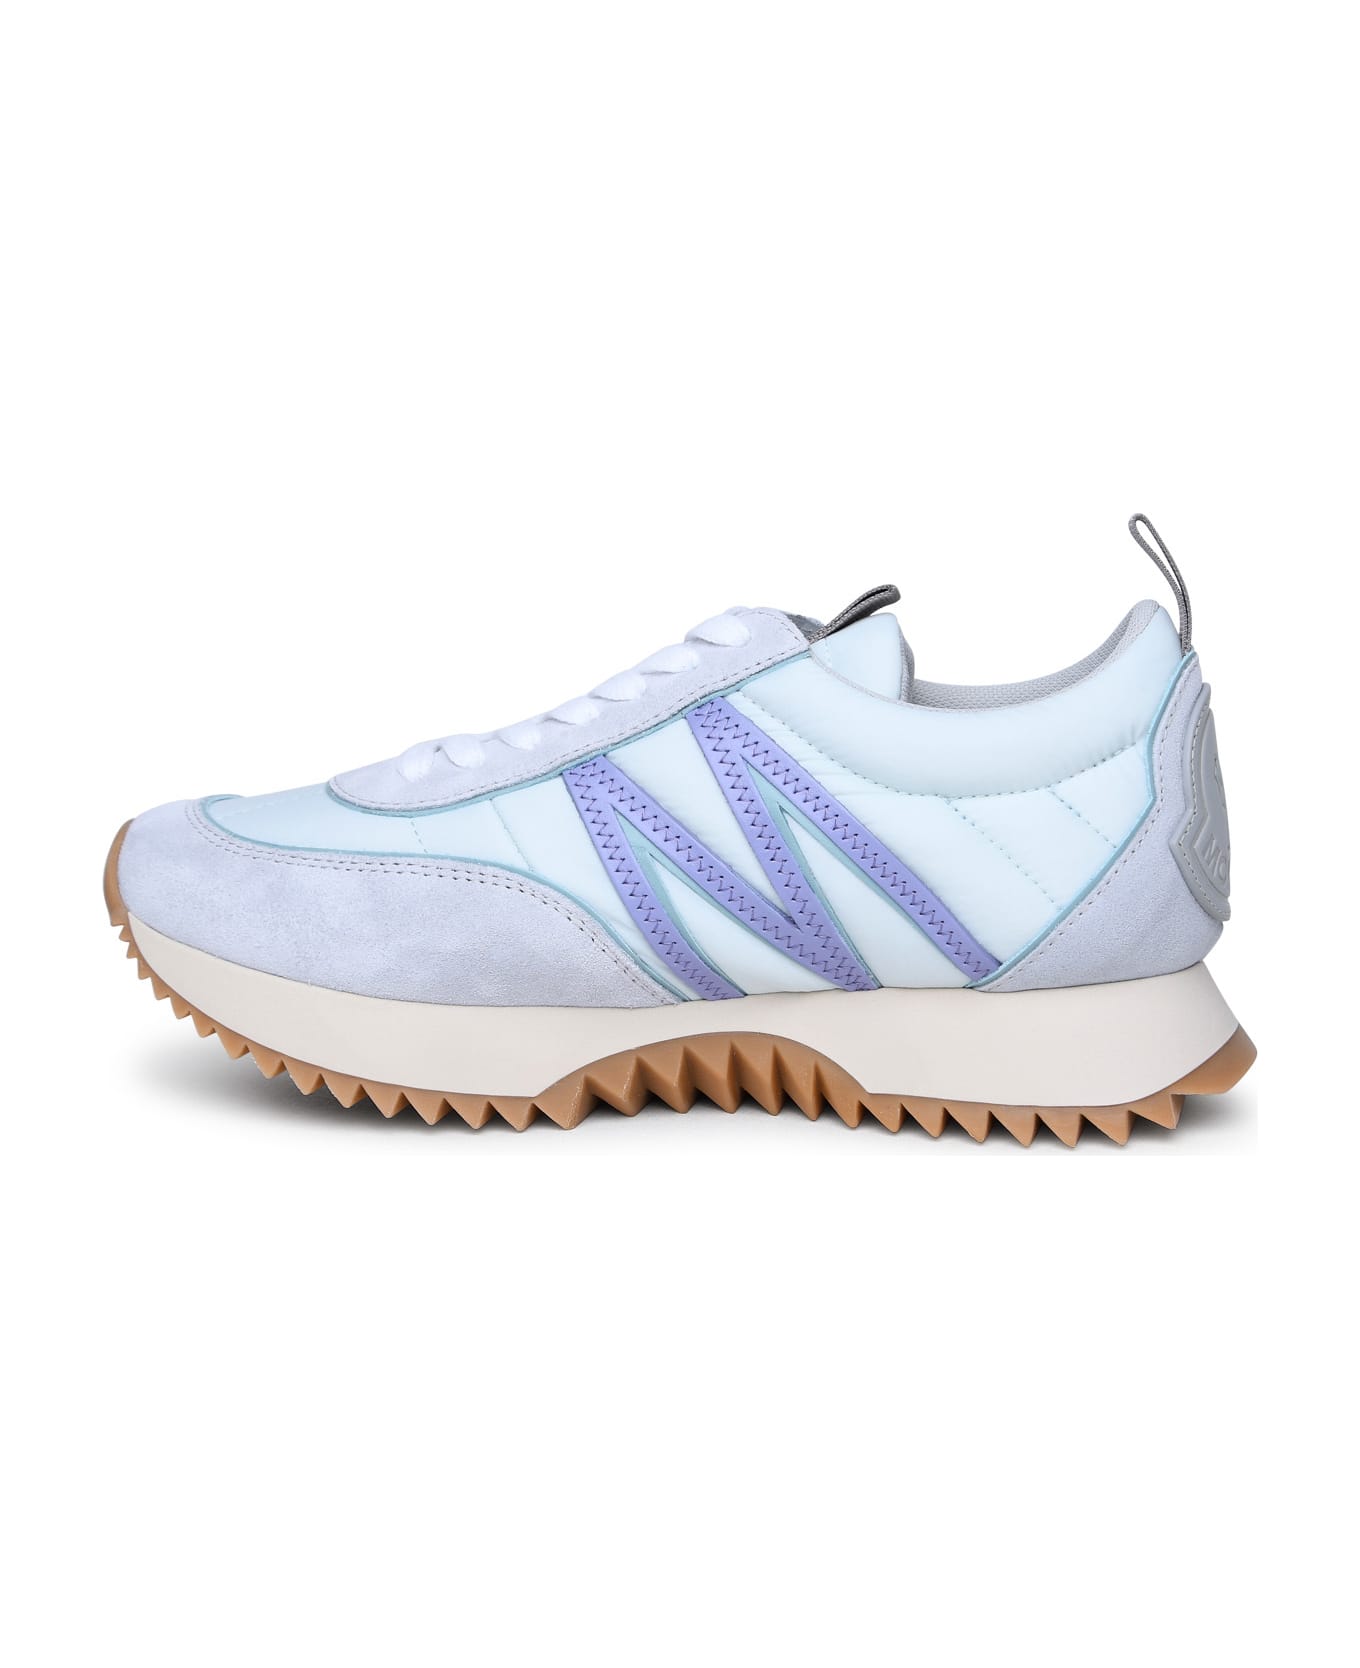 Moncler 'pacey' Sneakers In Light Blue Polyamide - Light Blue スニーカー